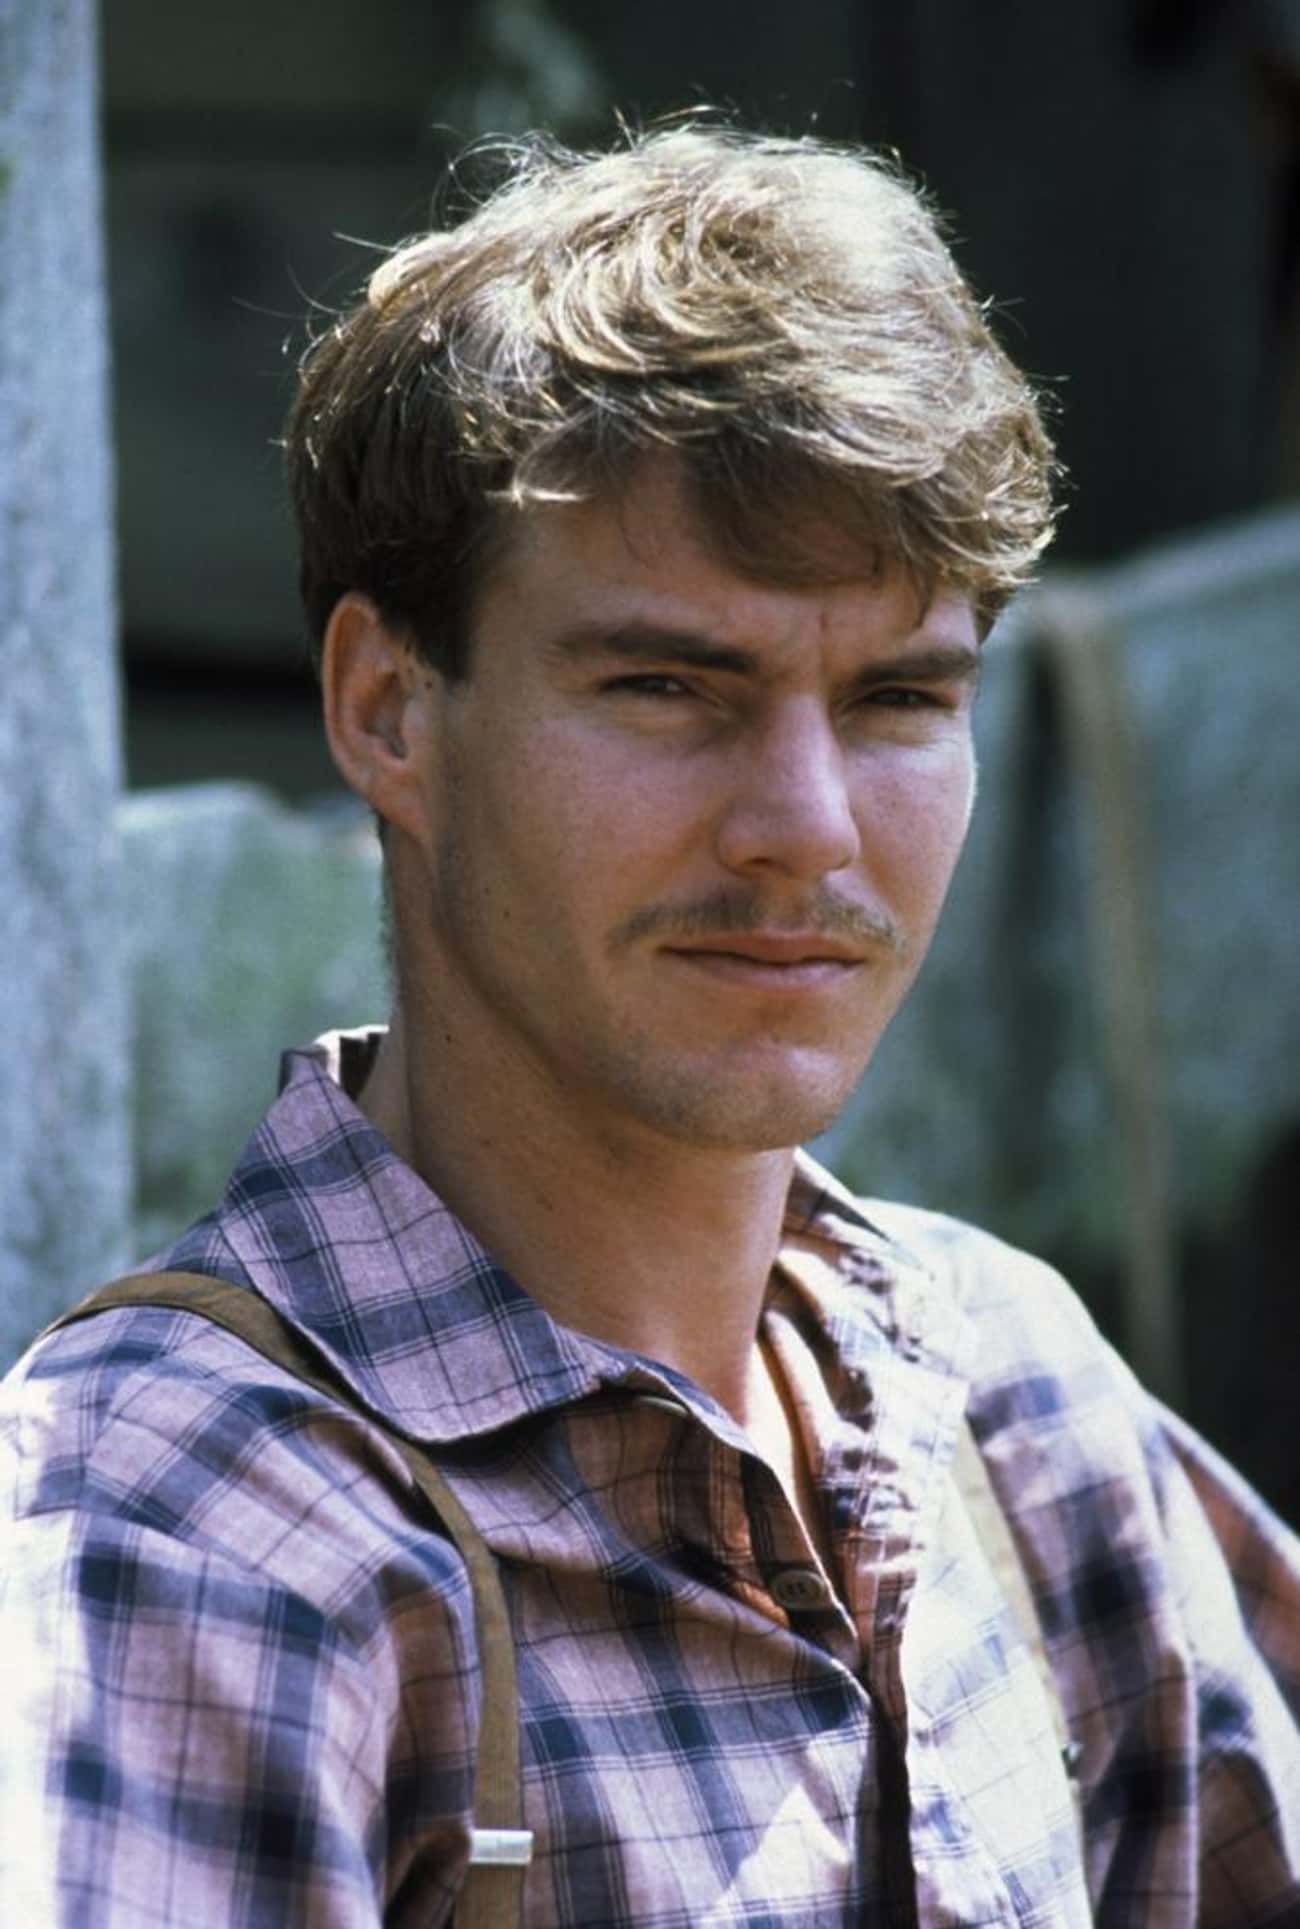 Young Dennis Quaid in Plaid Shirt and Suspenders